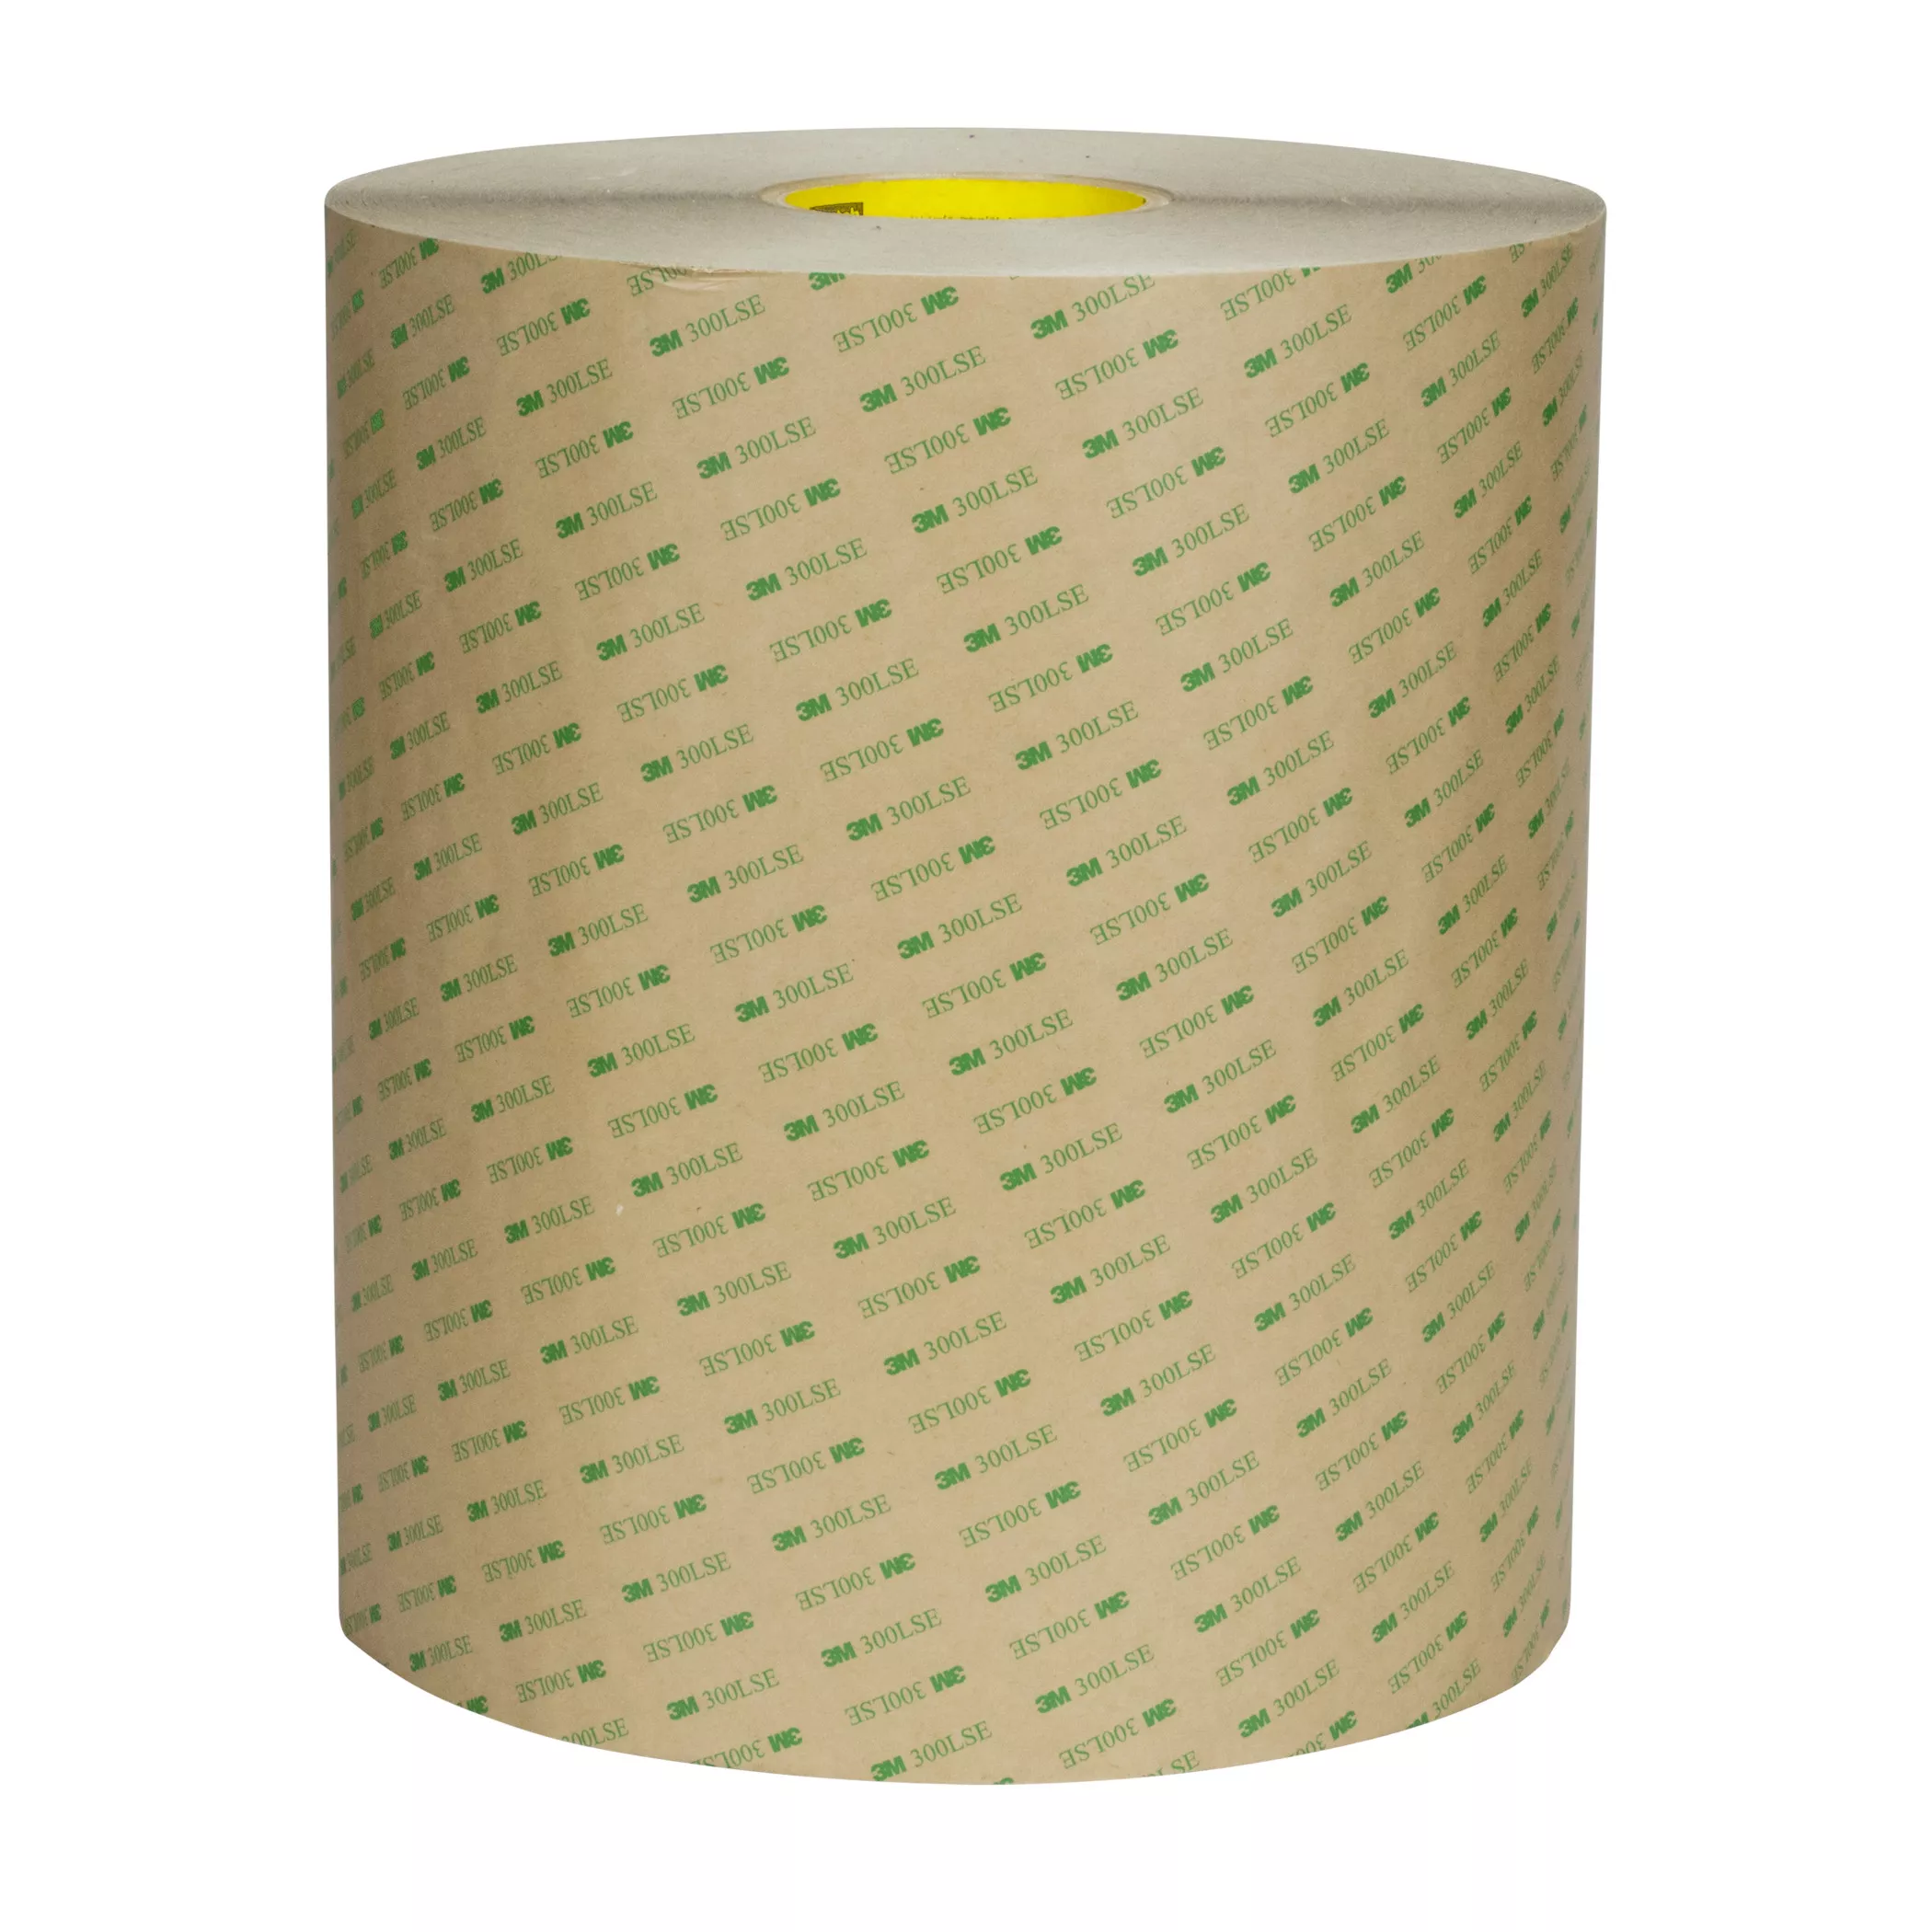 3M™ Double Coated Tape 93020LE, Clear, 54 in x 60 yd, 7.9 mil, 1
Roll/Case